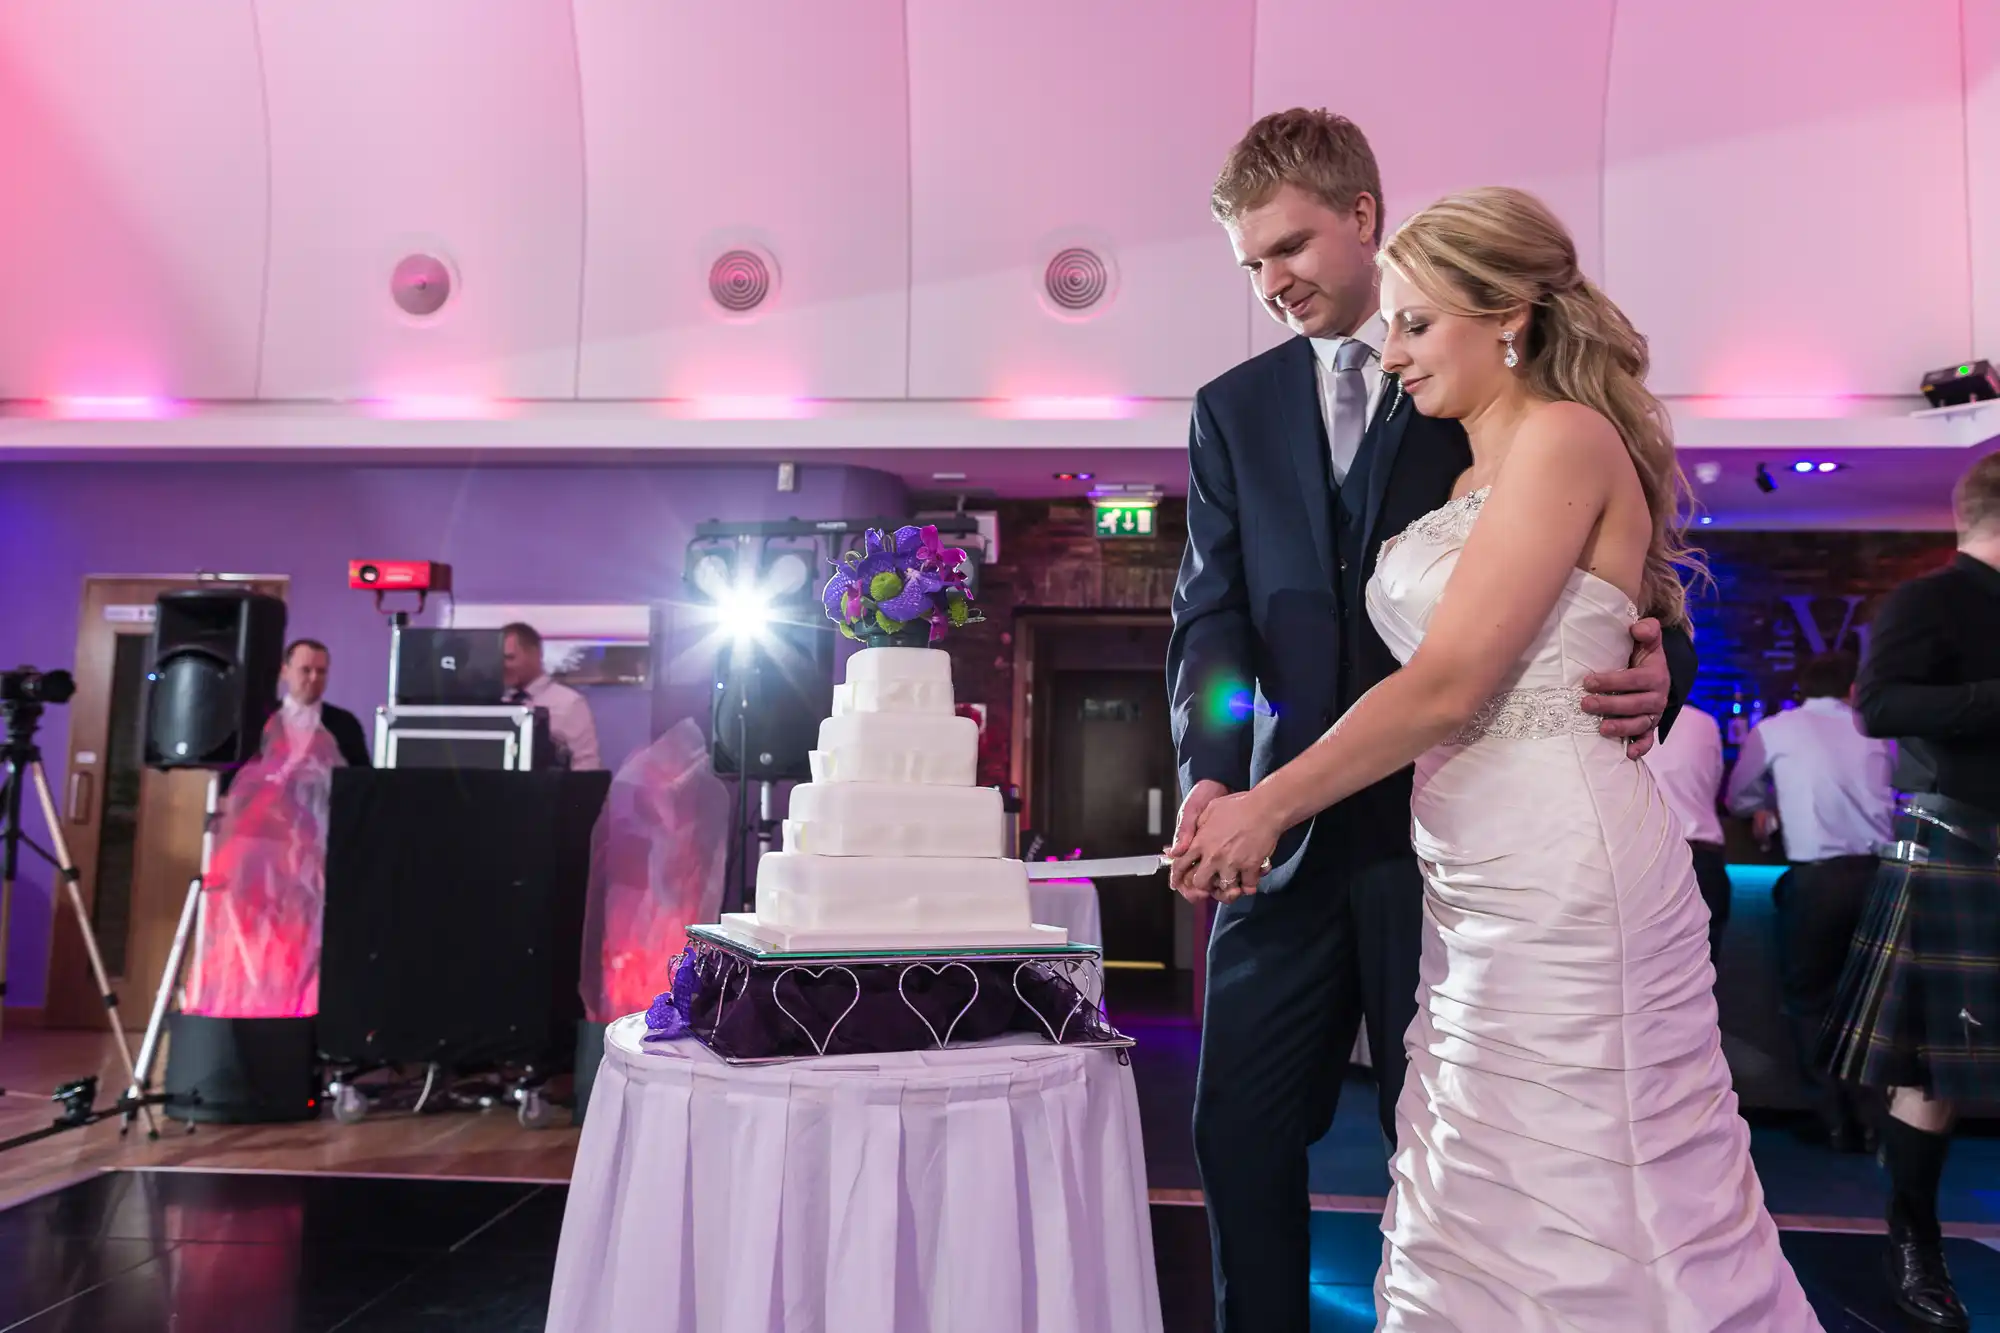 A bride and groom cutting a multi-tiered wedding cake in a banquet hall with purple lighting and a dj setup in the background.